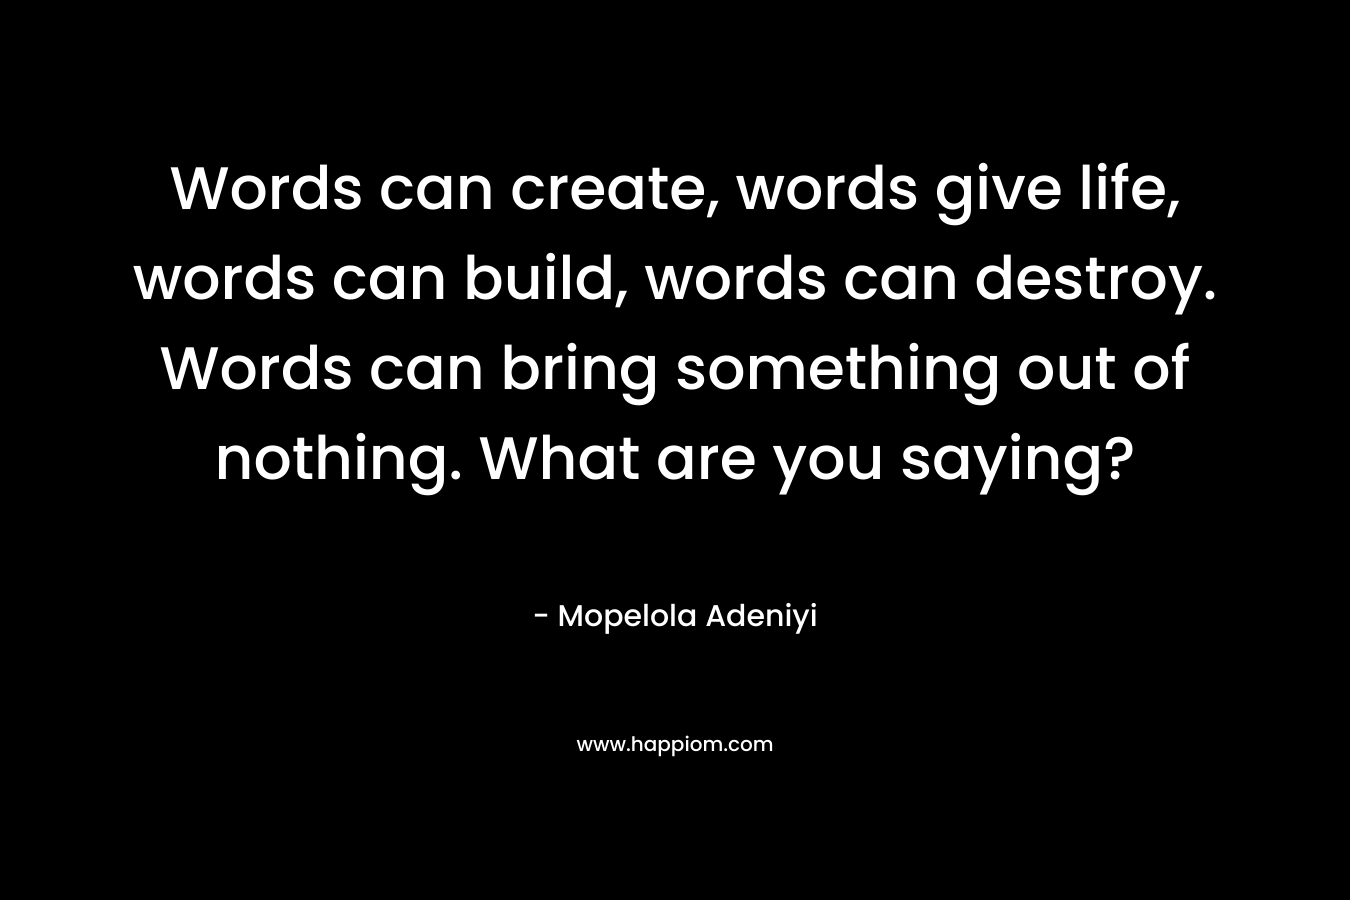 Words can create, words give life, words can build, words can destroy. Words can bring something out of nothing. What are you saying?